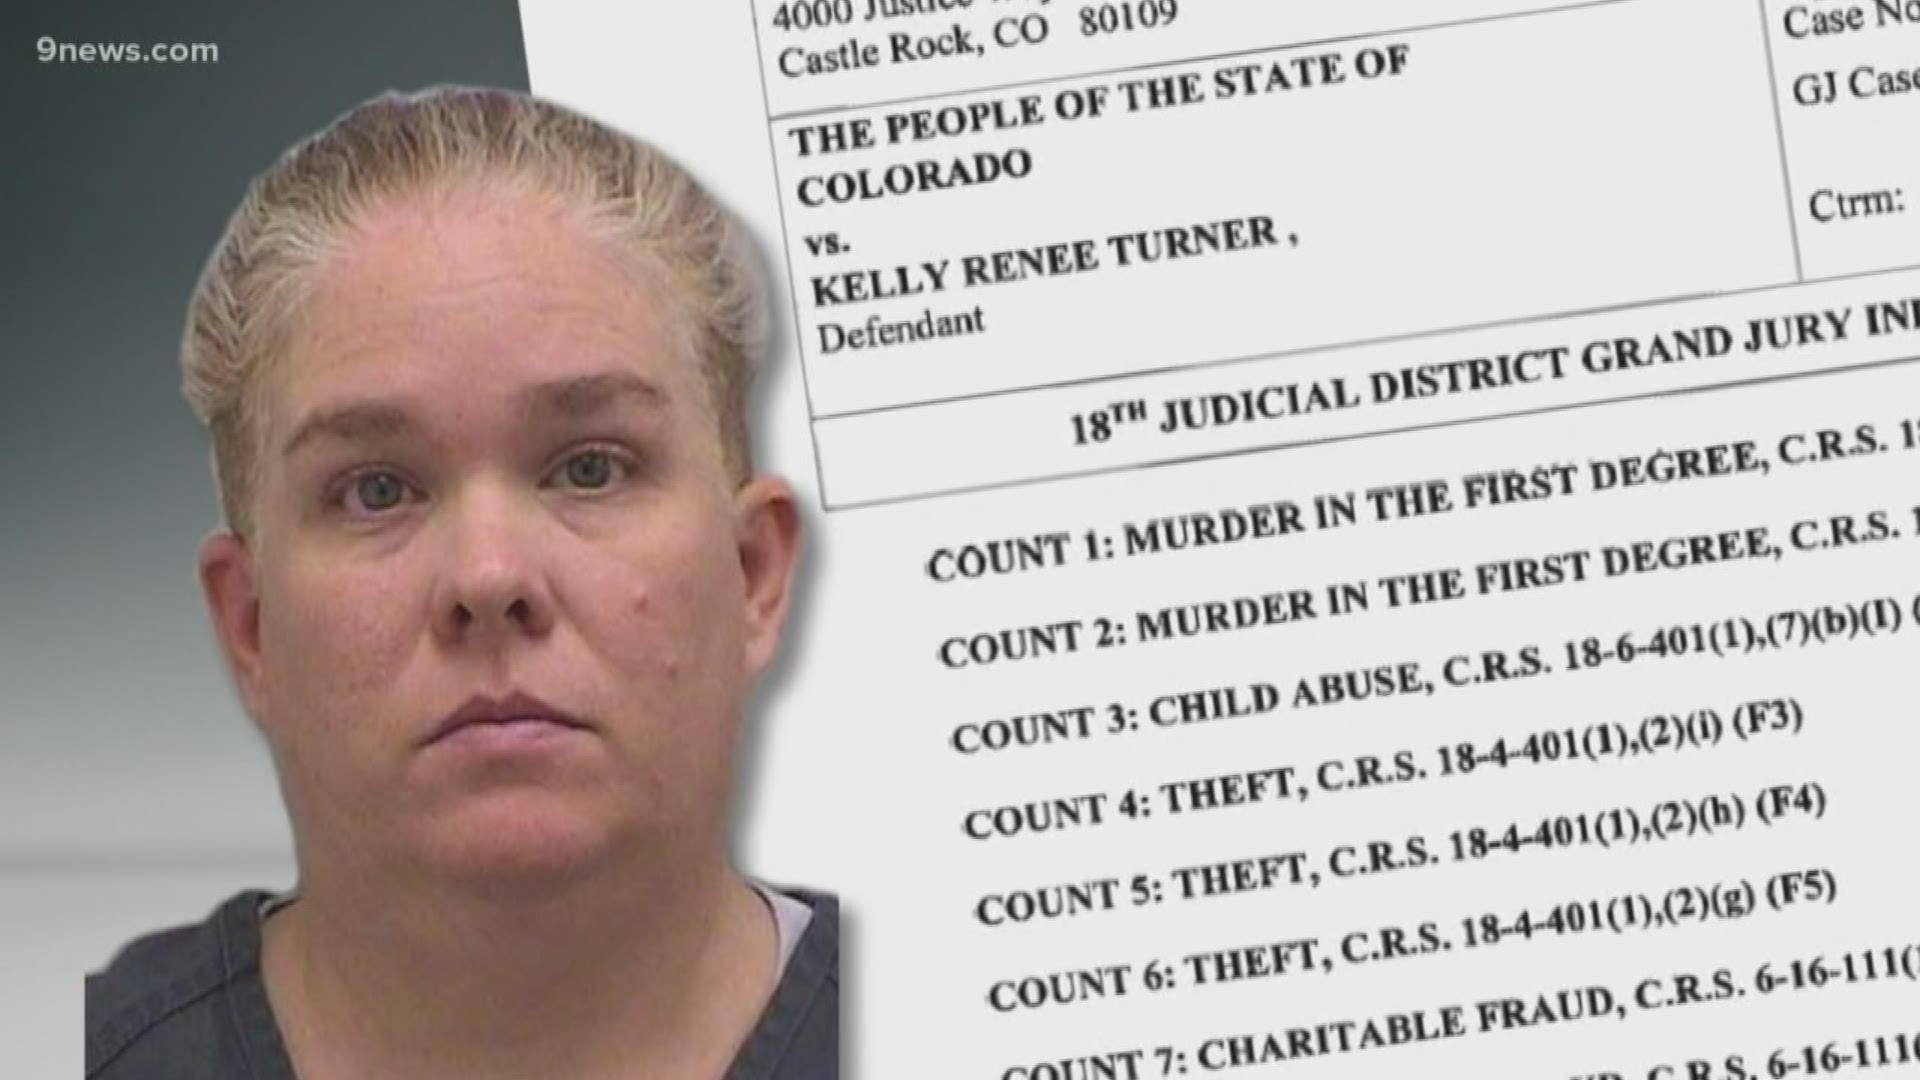 Kelly Turner is accused of faking her daughter's illness and was indicted for first-degree murder in 2019.